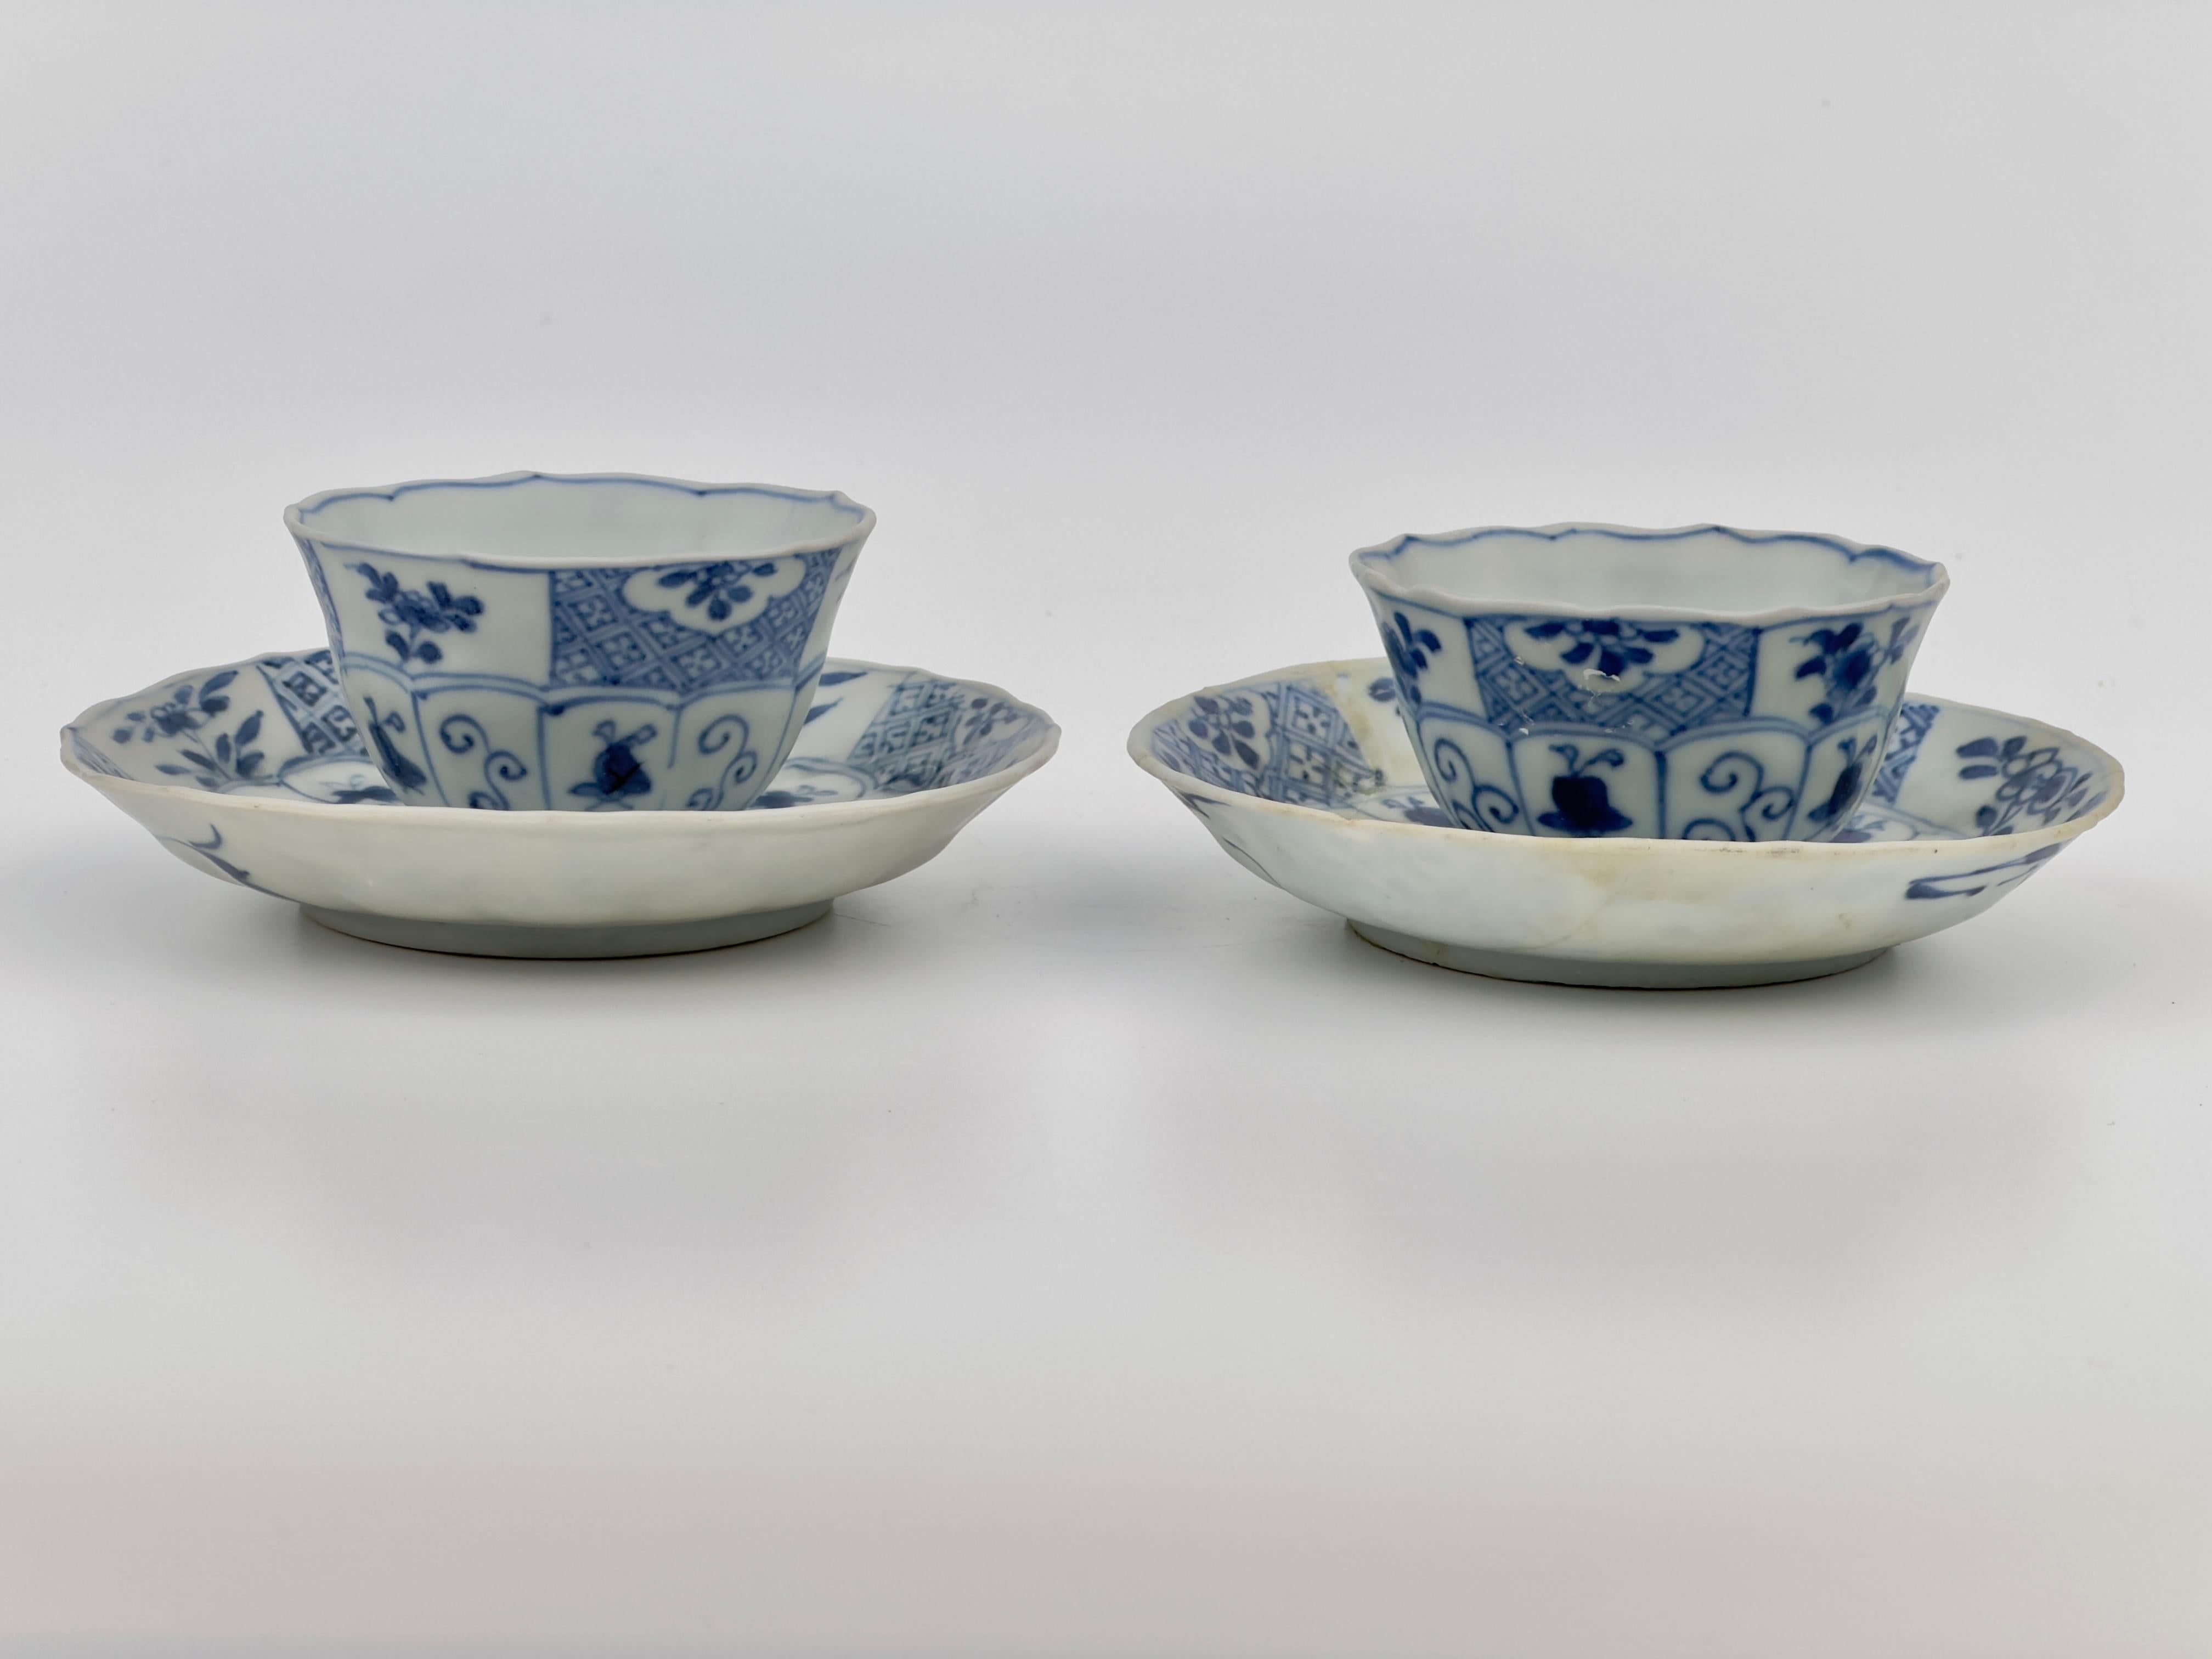 Blue and white tea set c 1725, Qing dynasty, Yongzheng reign For Sale 5